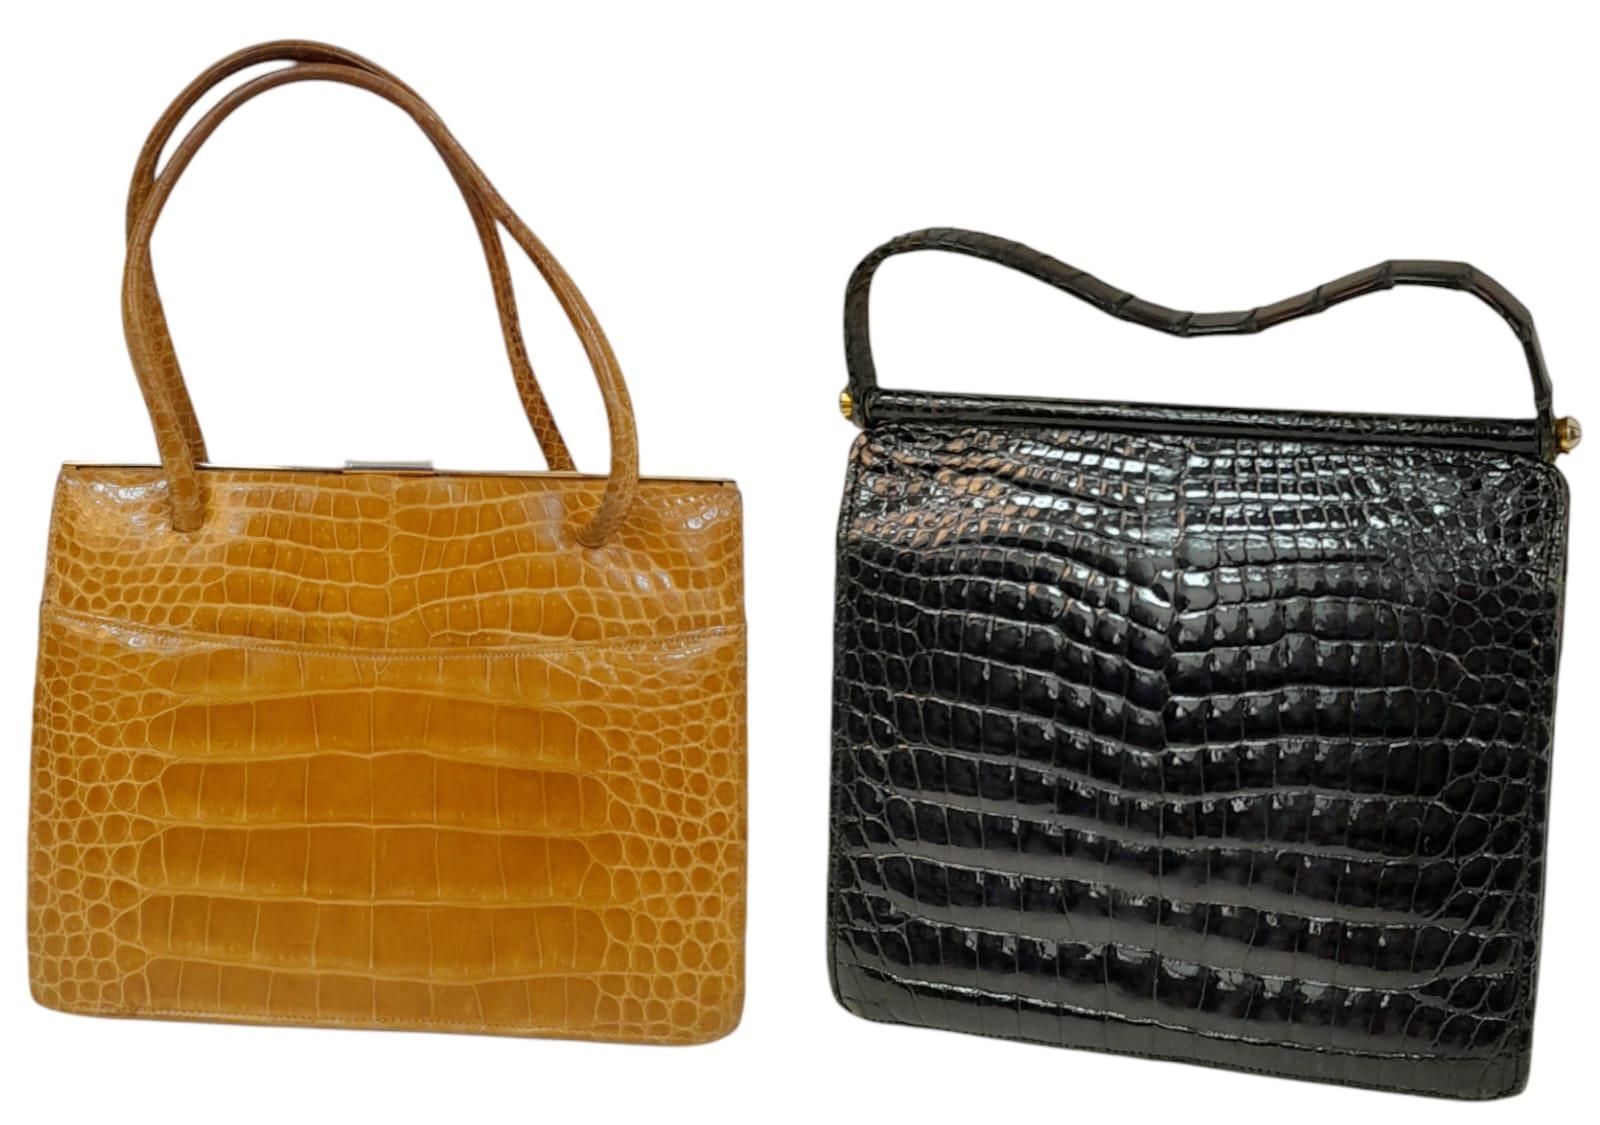 Two Crocodile Leather Hand Bags. Black crocodile bag has gold-toned hardware, a single strap and - Image 2 of 6